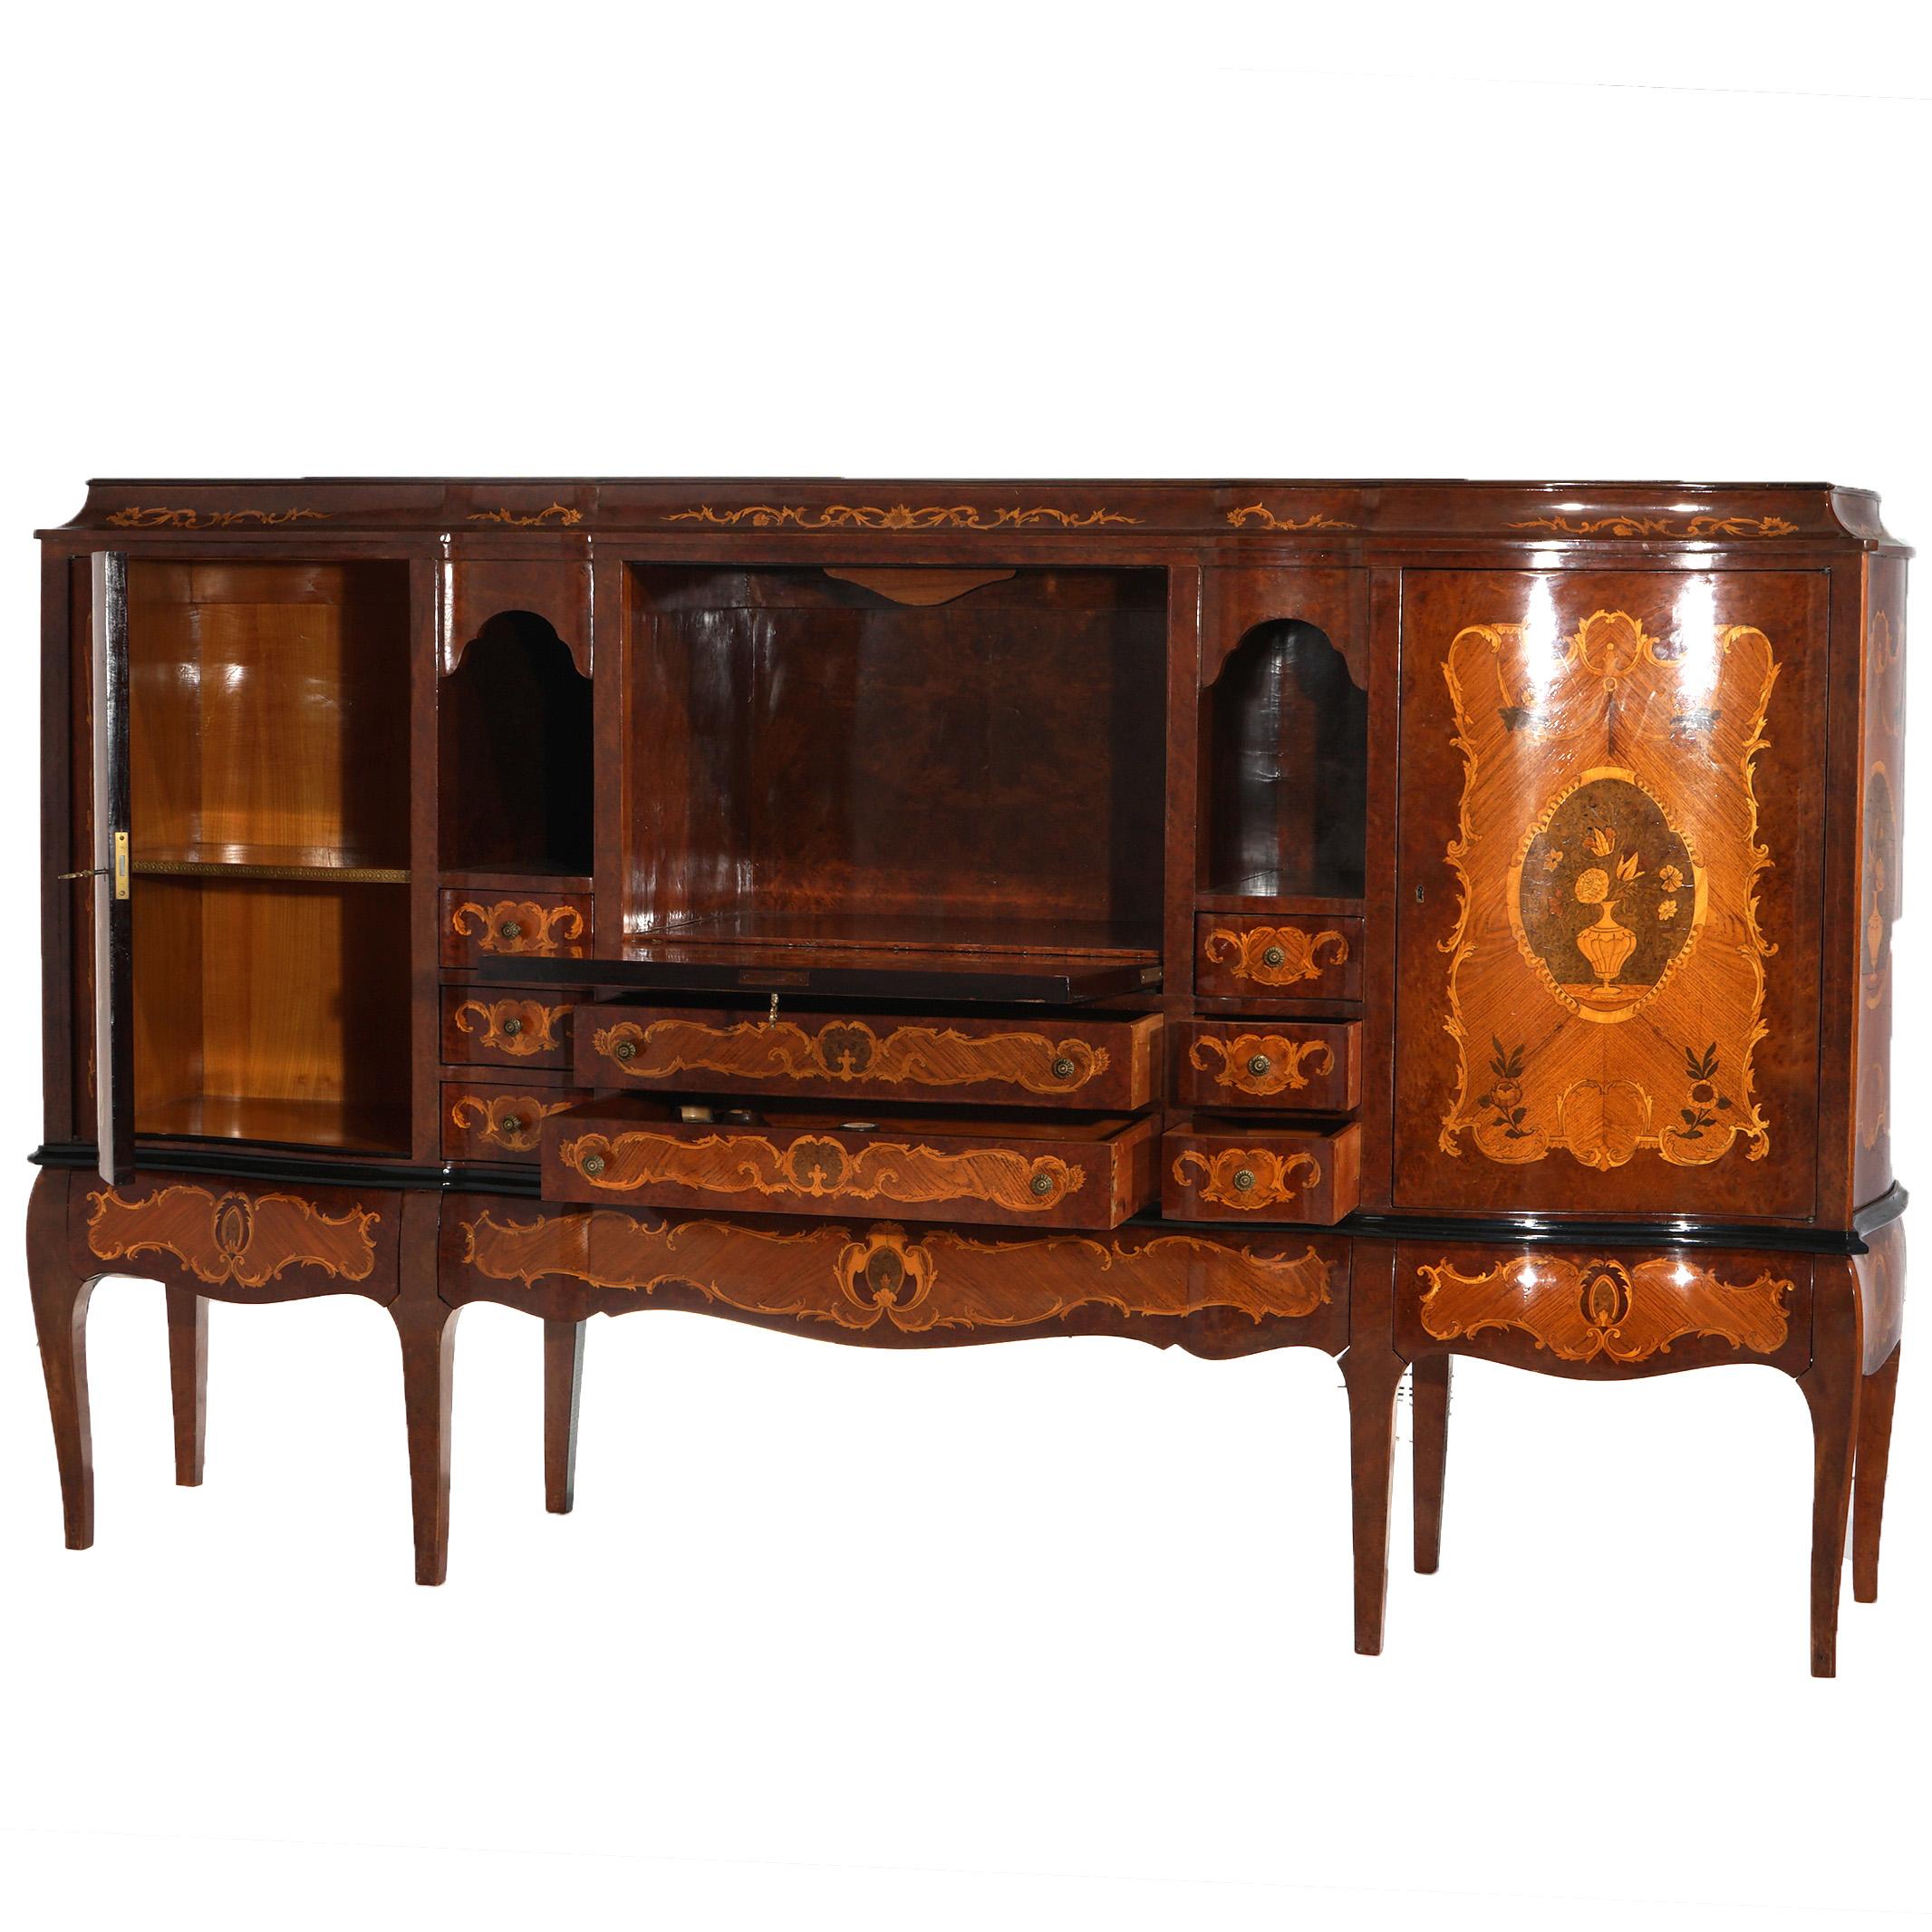 20th Century Antique French Kingwood Satinwood & Burlwood Marquetry Inlaid Sideboard C1930 For Sale